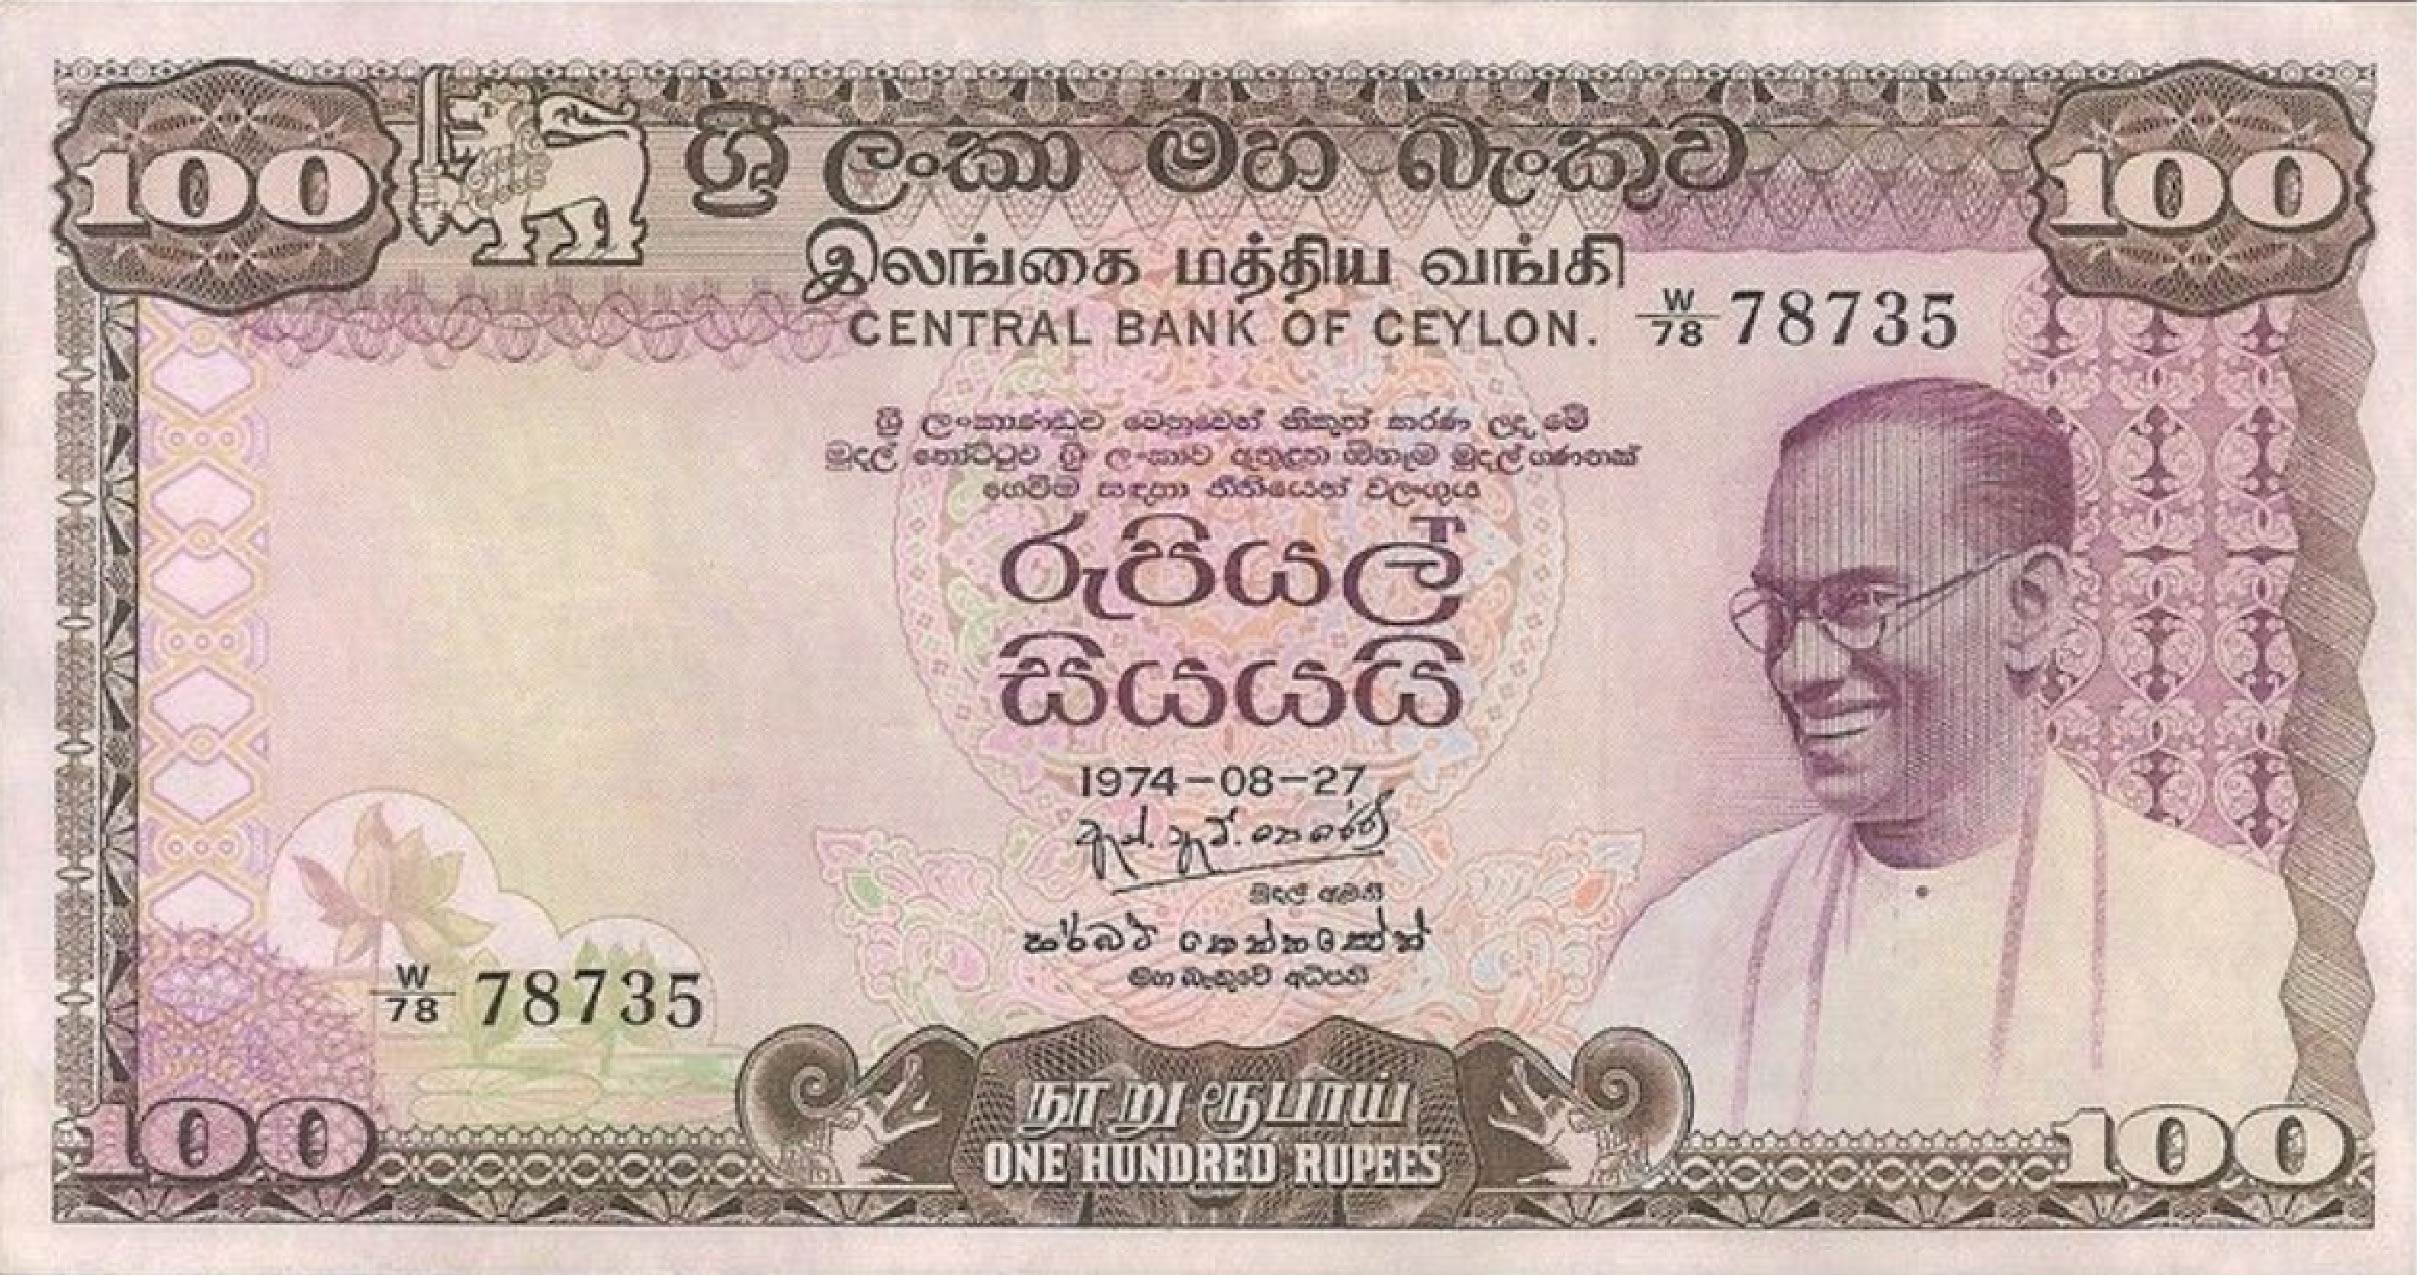 100 rupees Central Bank of Ceylon banknote (S.W.R.D. Bandaranaike)